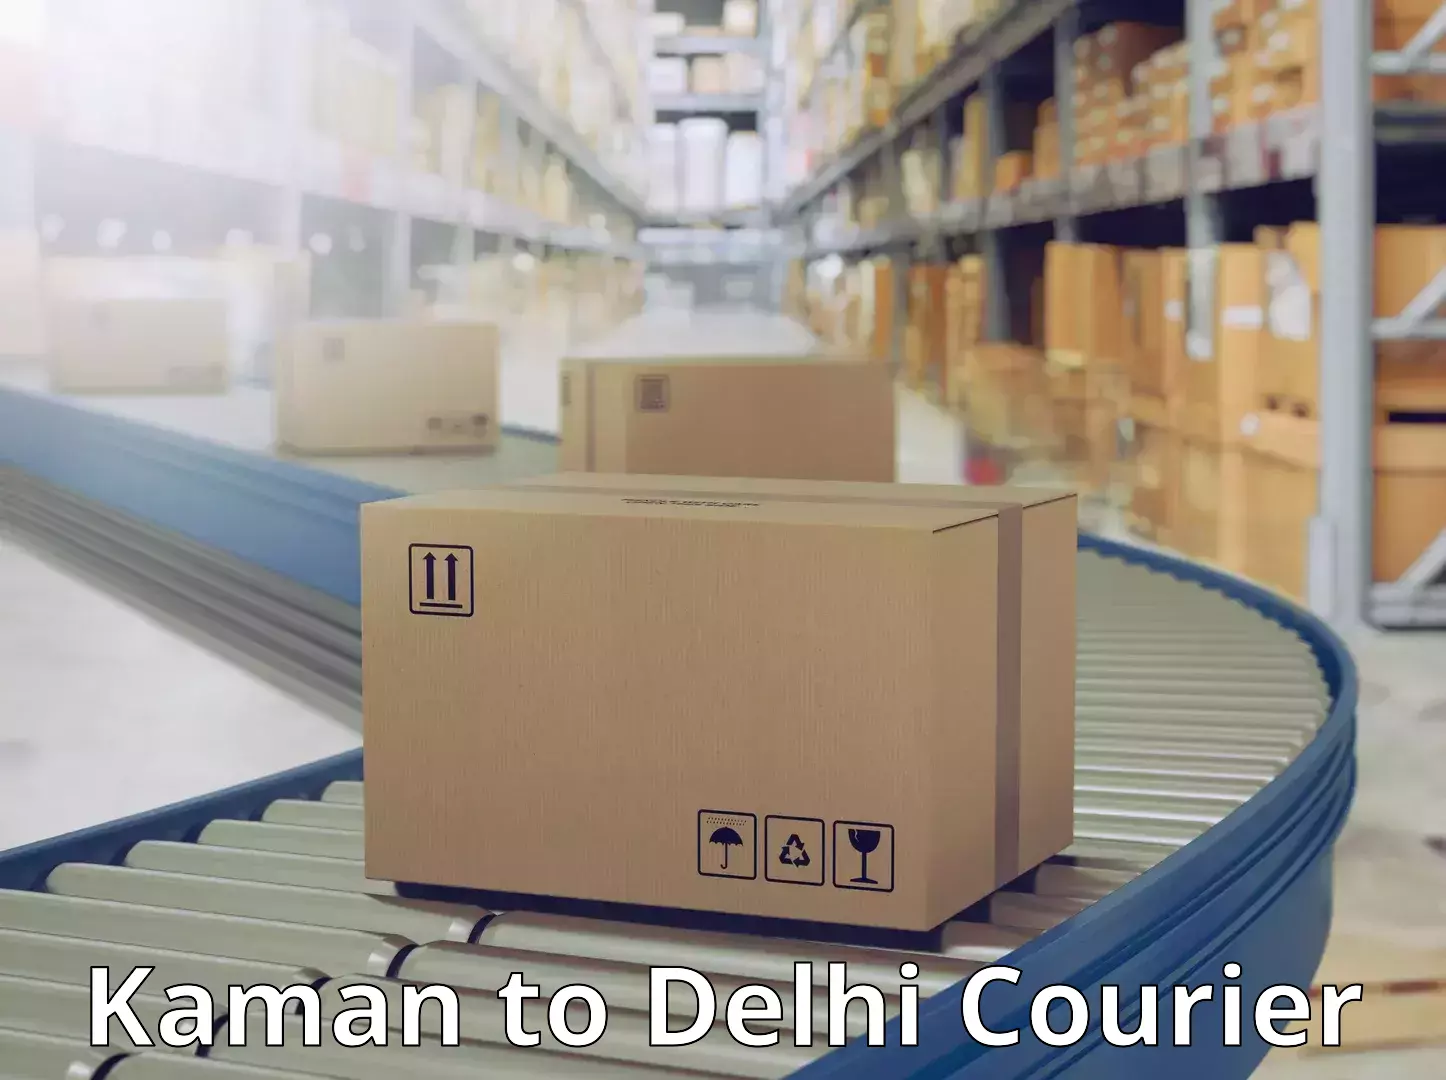 Express delivery capabilities Kaman to East Delhi